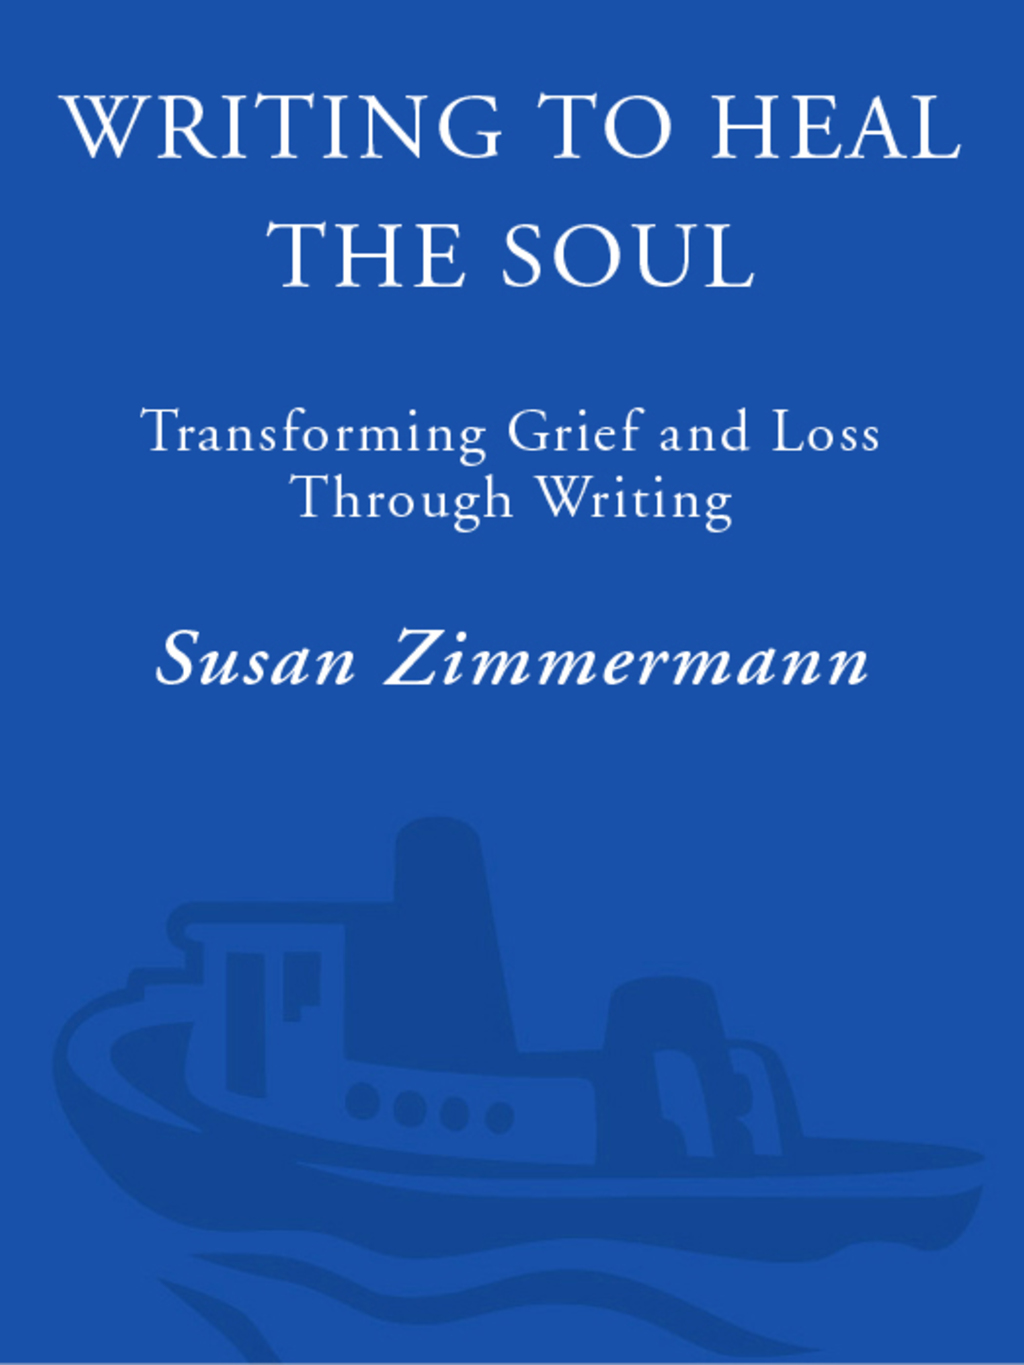 Writing to Heal the Soul (eBook) - Susan Zimmermann,